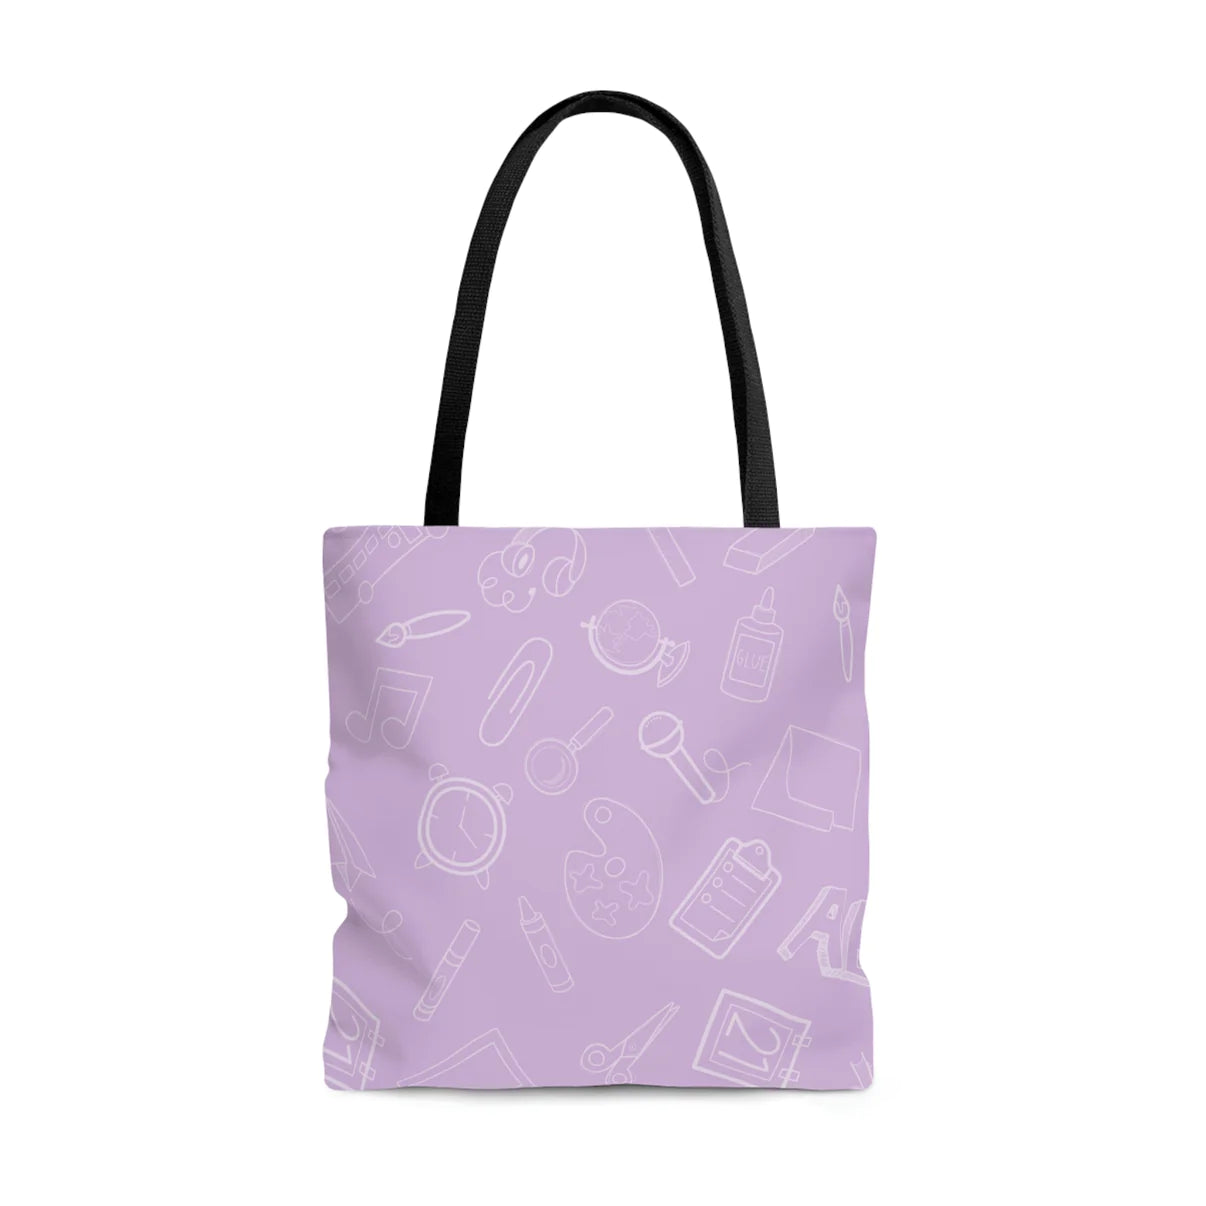 Customizable Elementary Doodles Tote